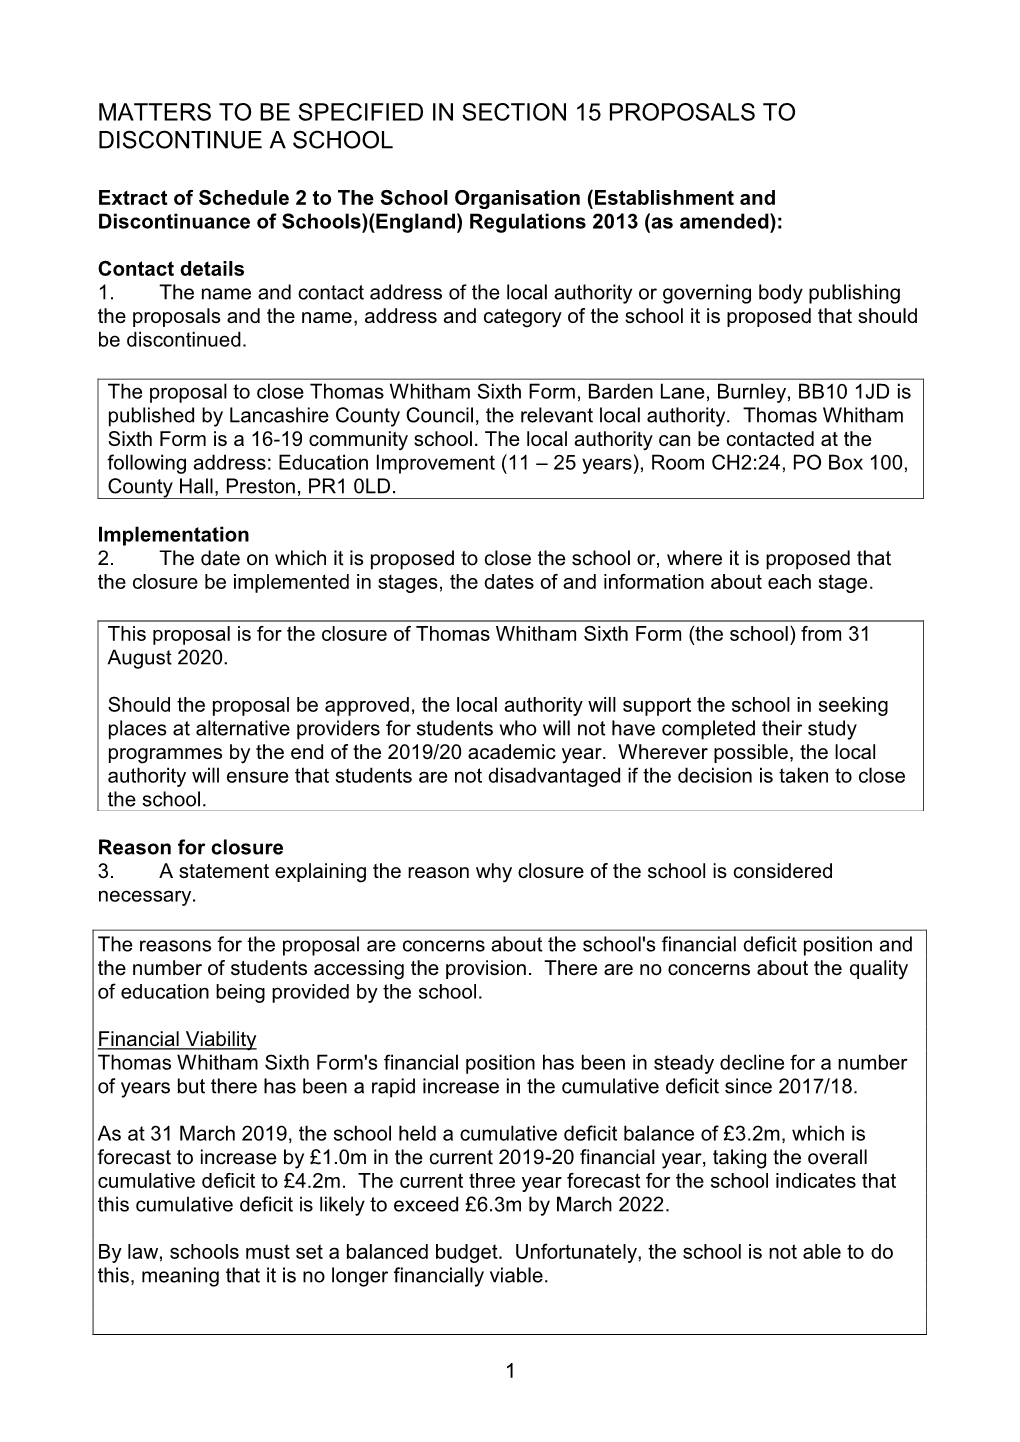 Thomas Whitham Sixth Form Complete Proposal